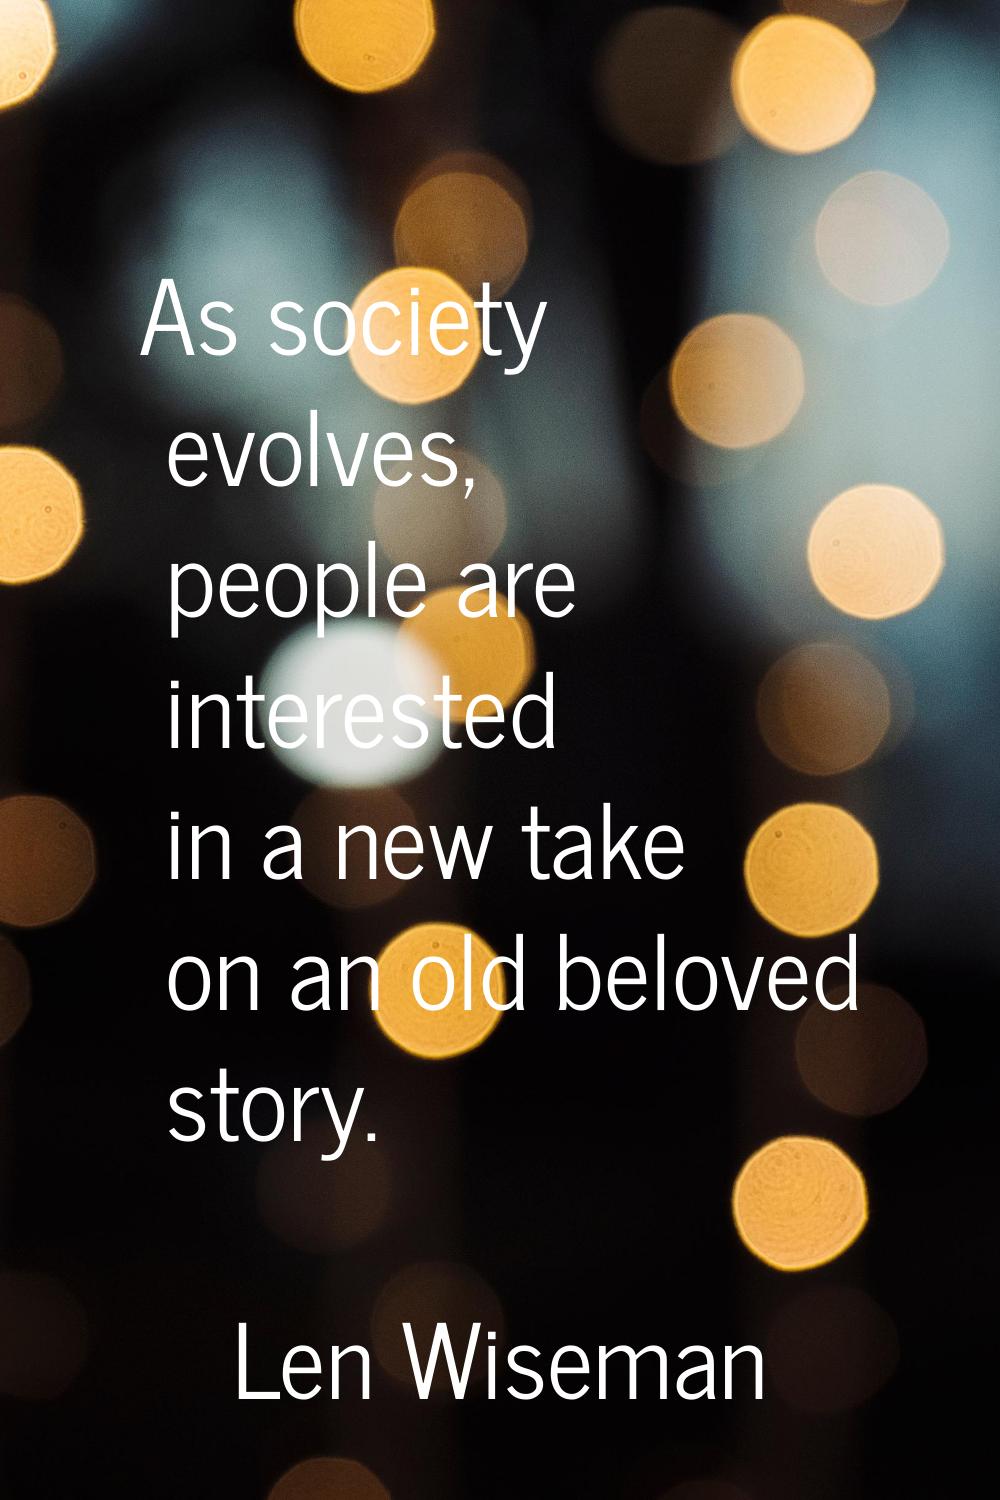 As society evolves, people are interested in a new take on an old beloved story.